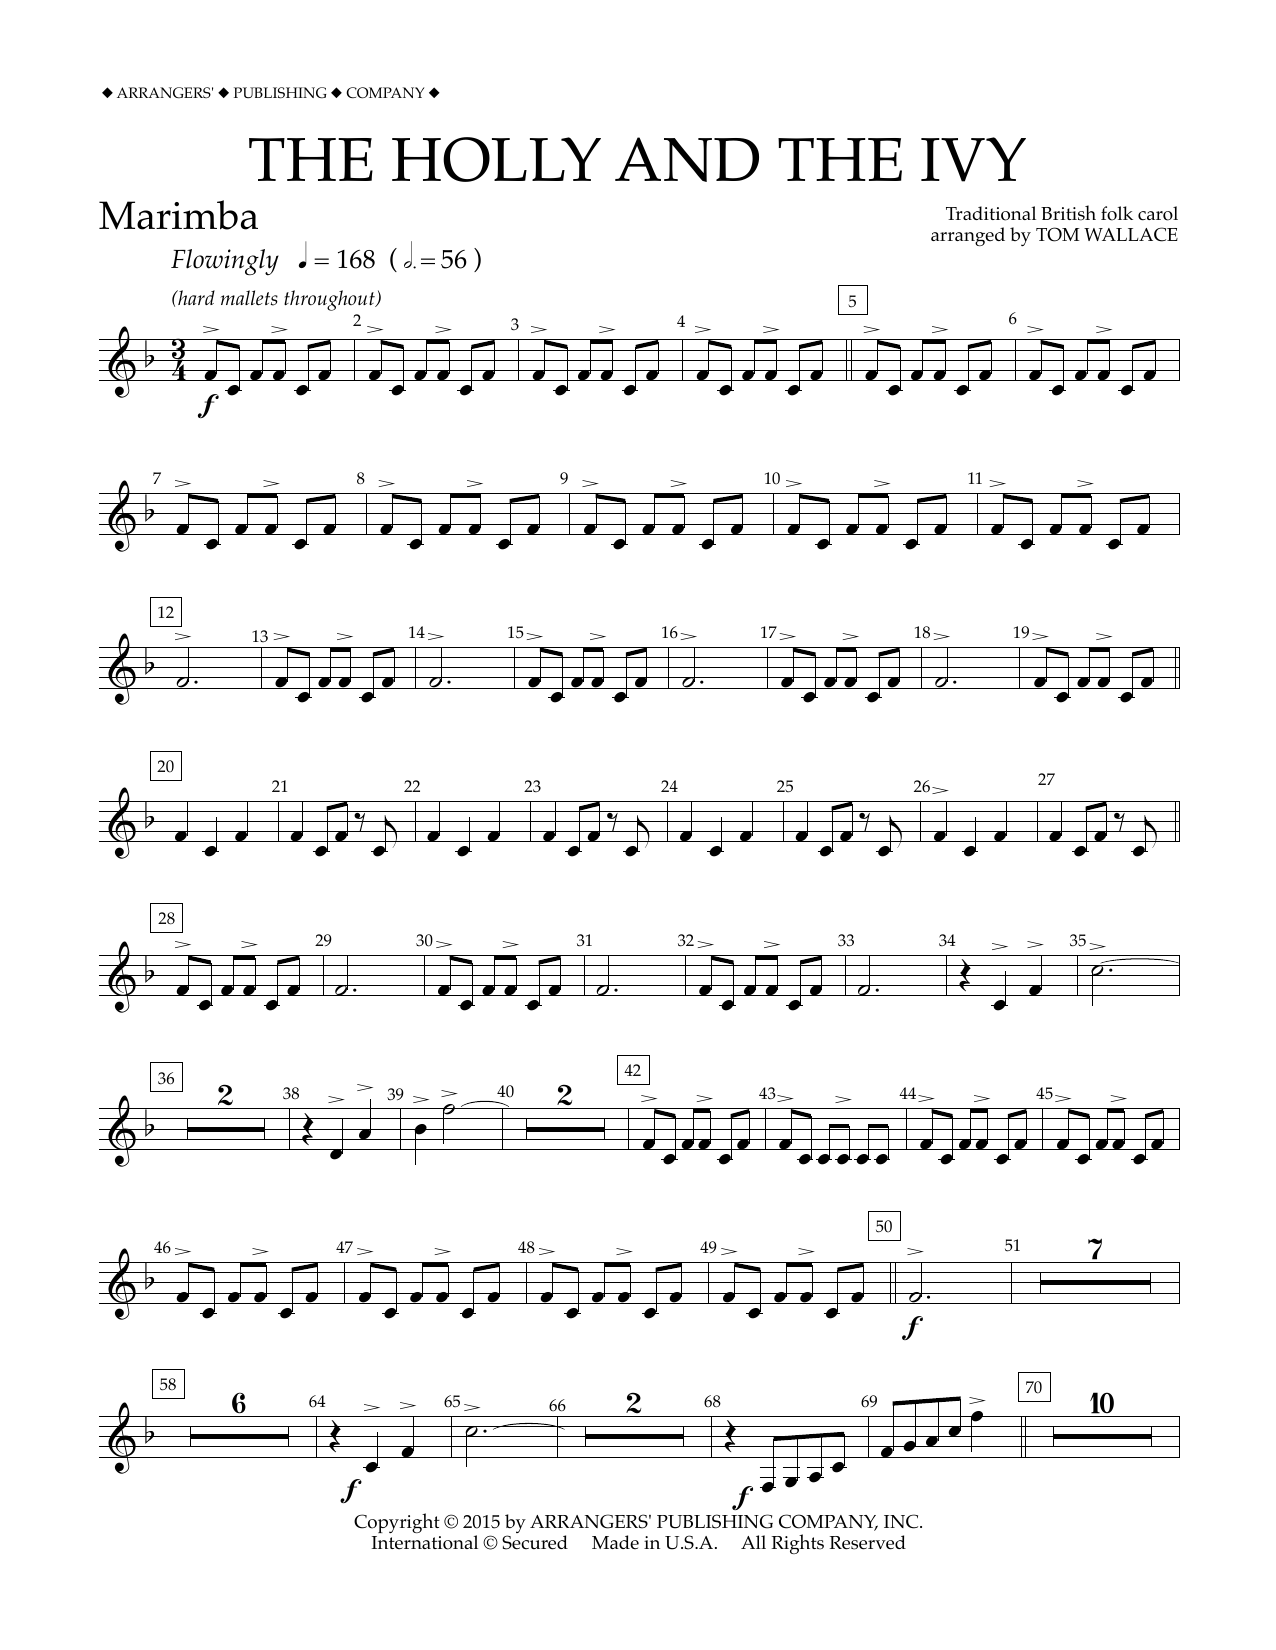 Download Tom Wallace The Holly and the Ivy - Marimba Sheet Music